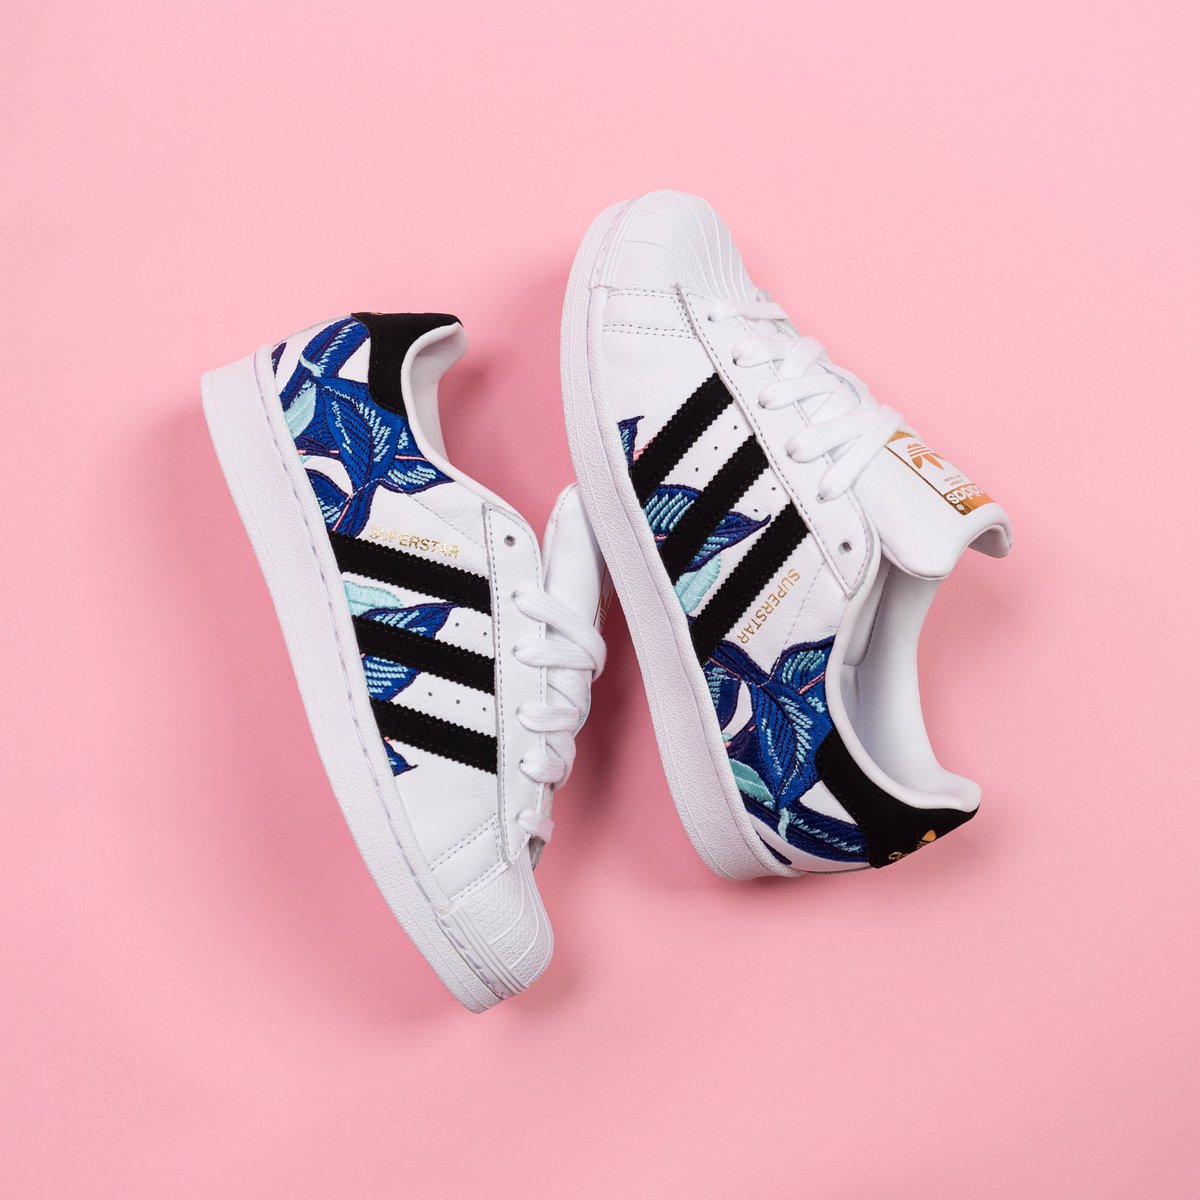 adidas floral embroidery shoes